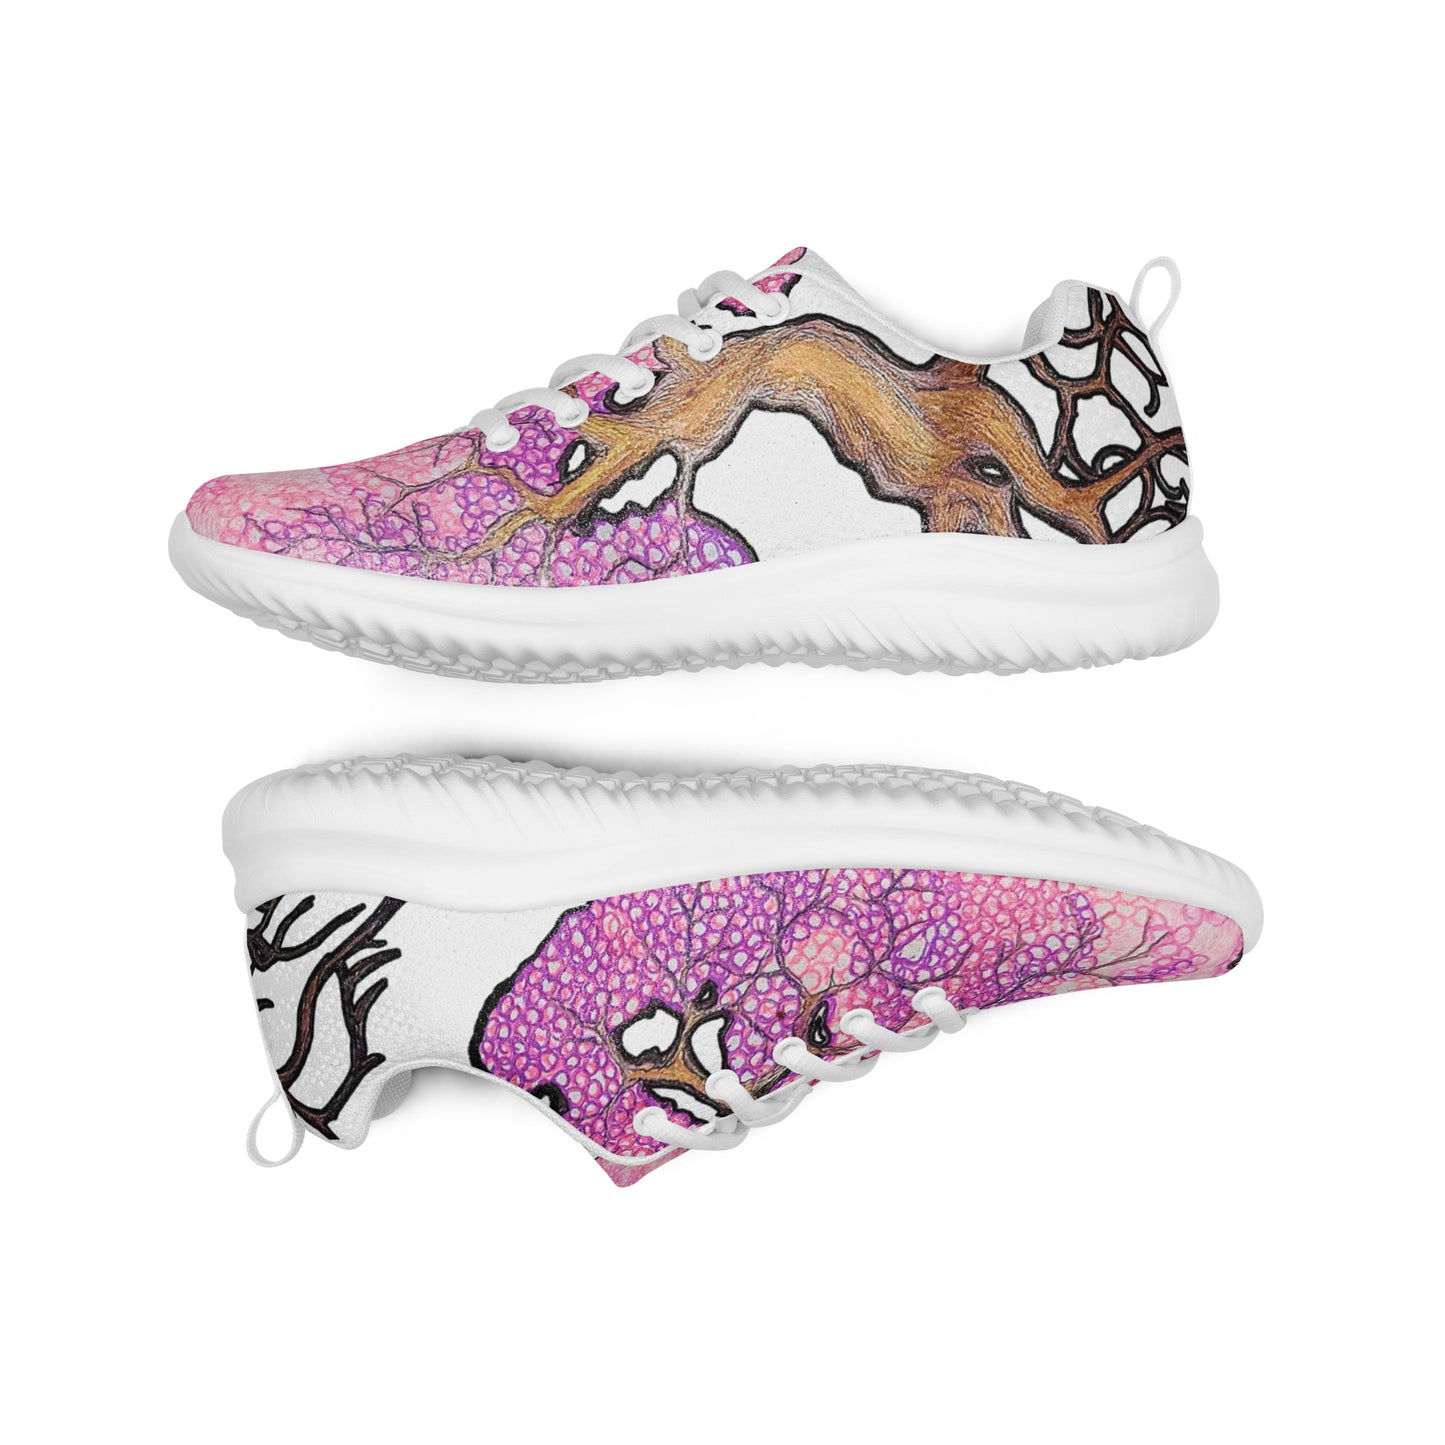 Cherry Blossom Women’s athletic shoes